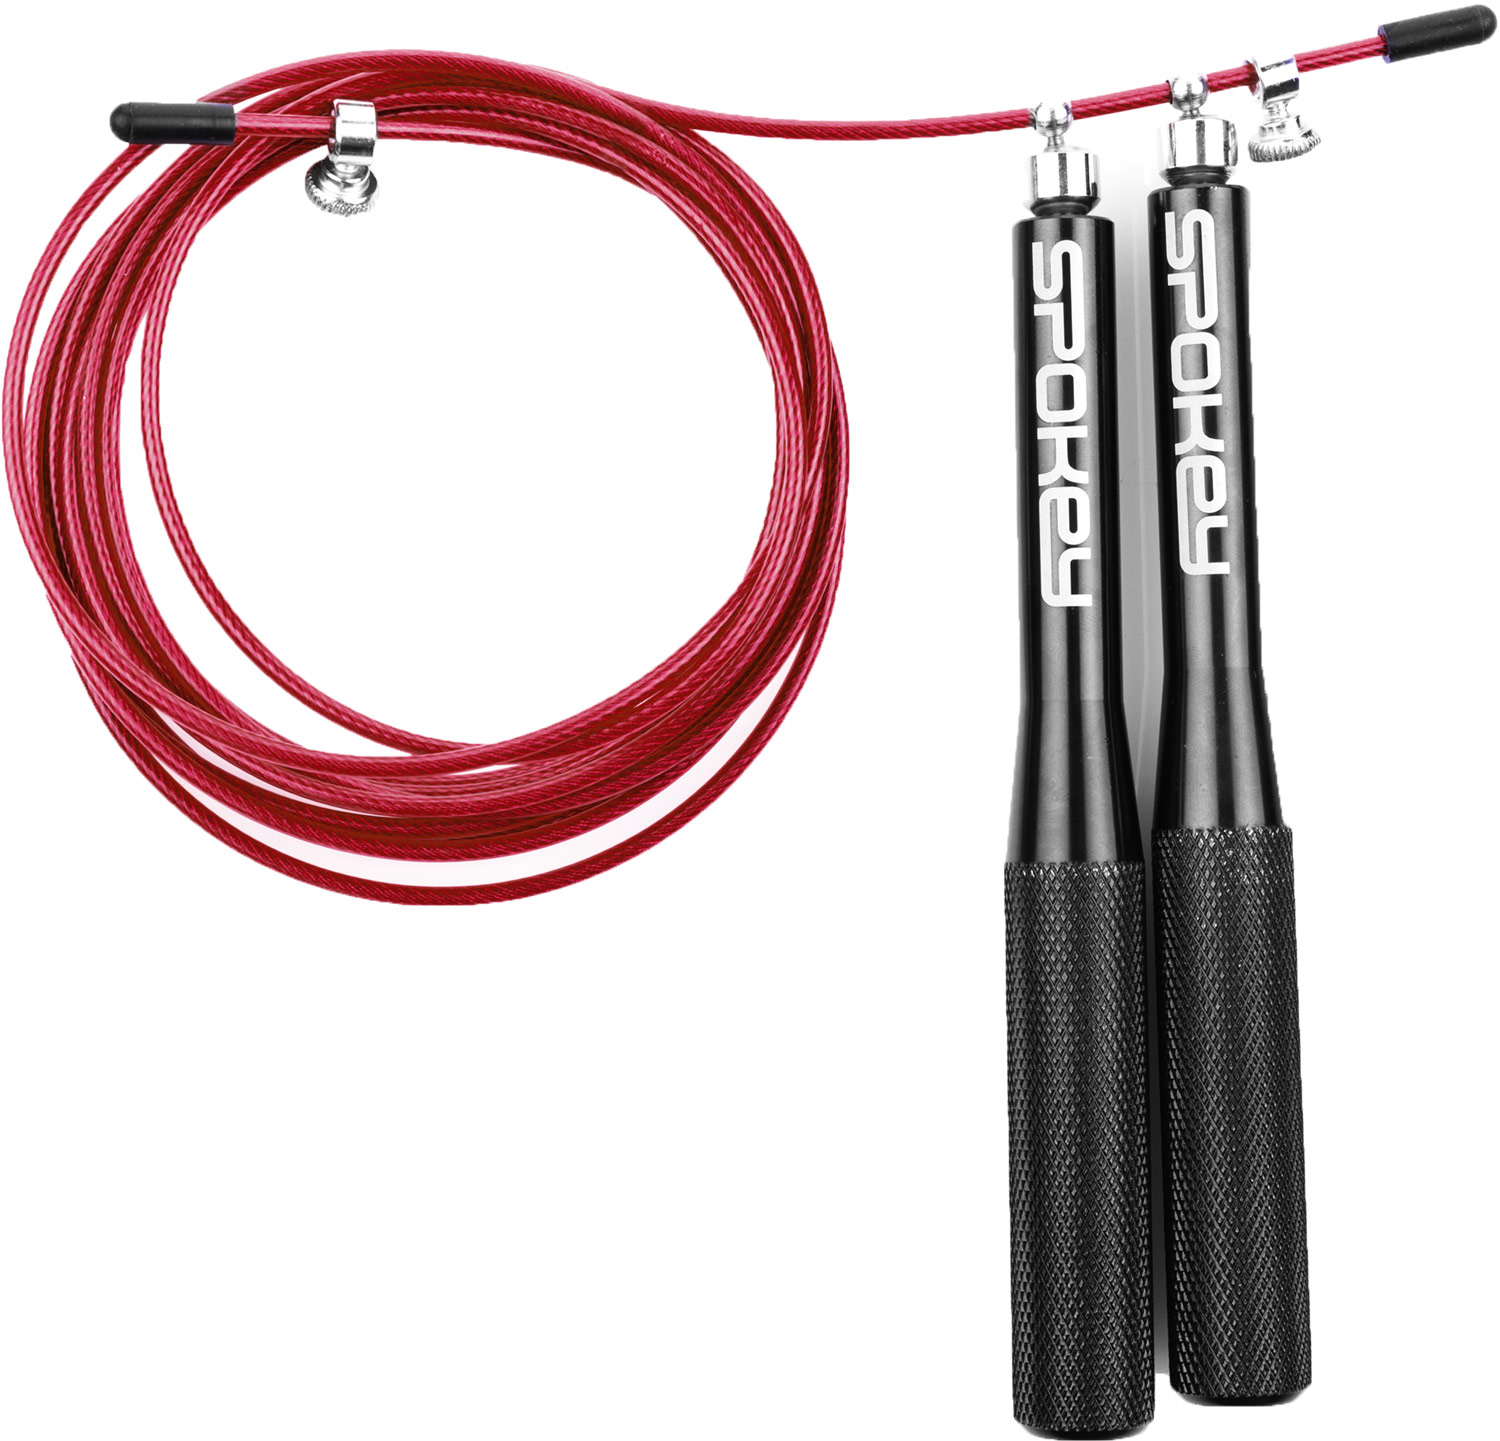 Jump rope with bearing